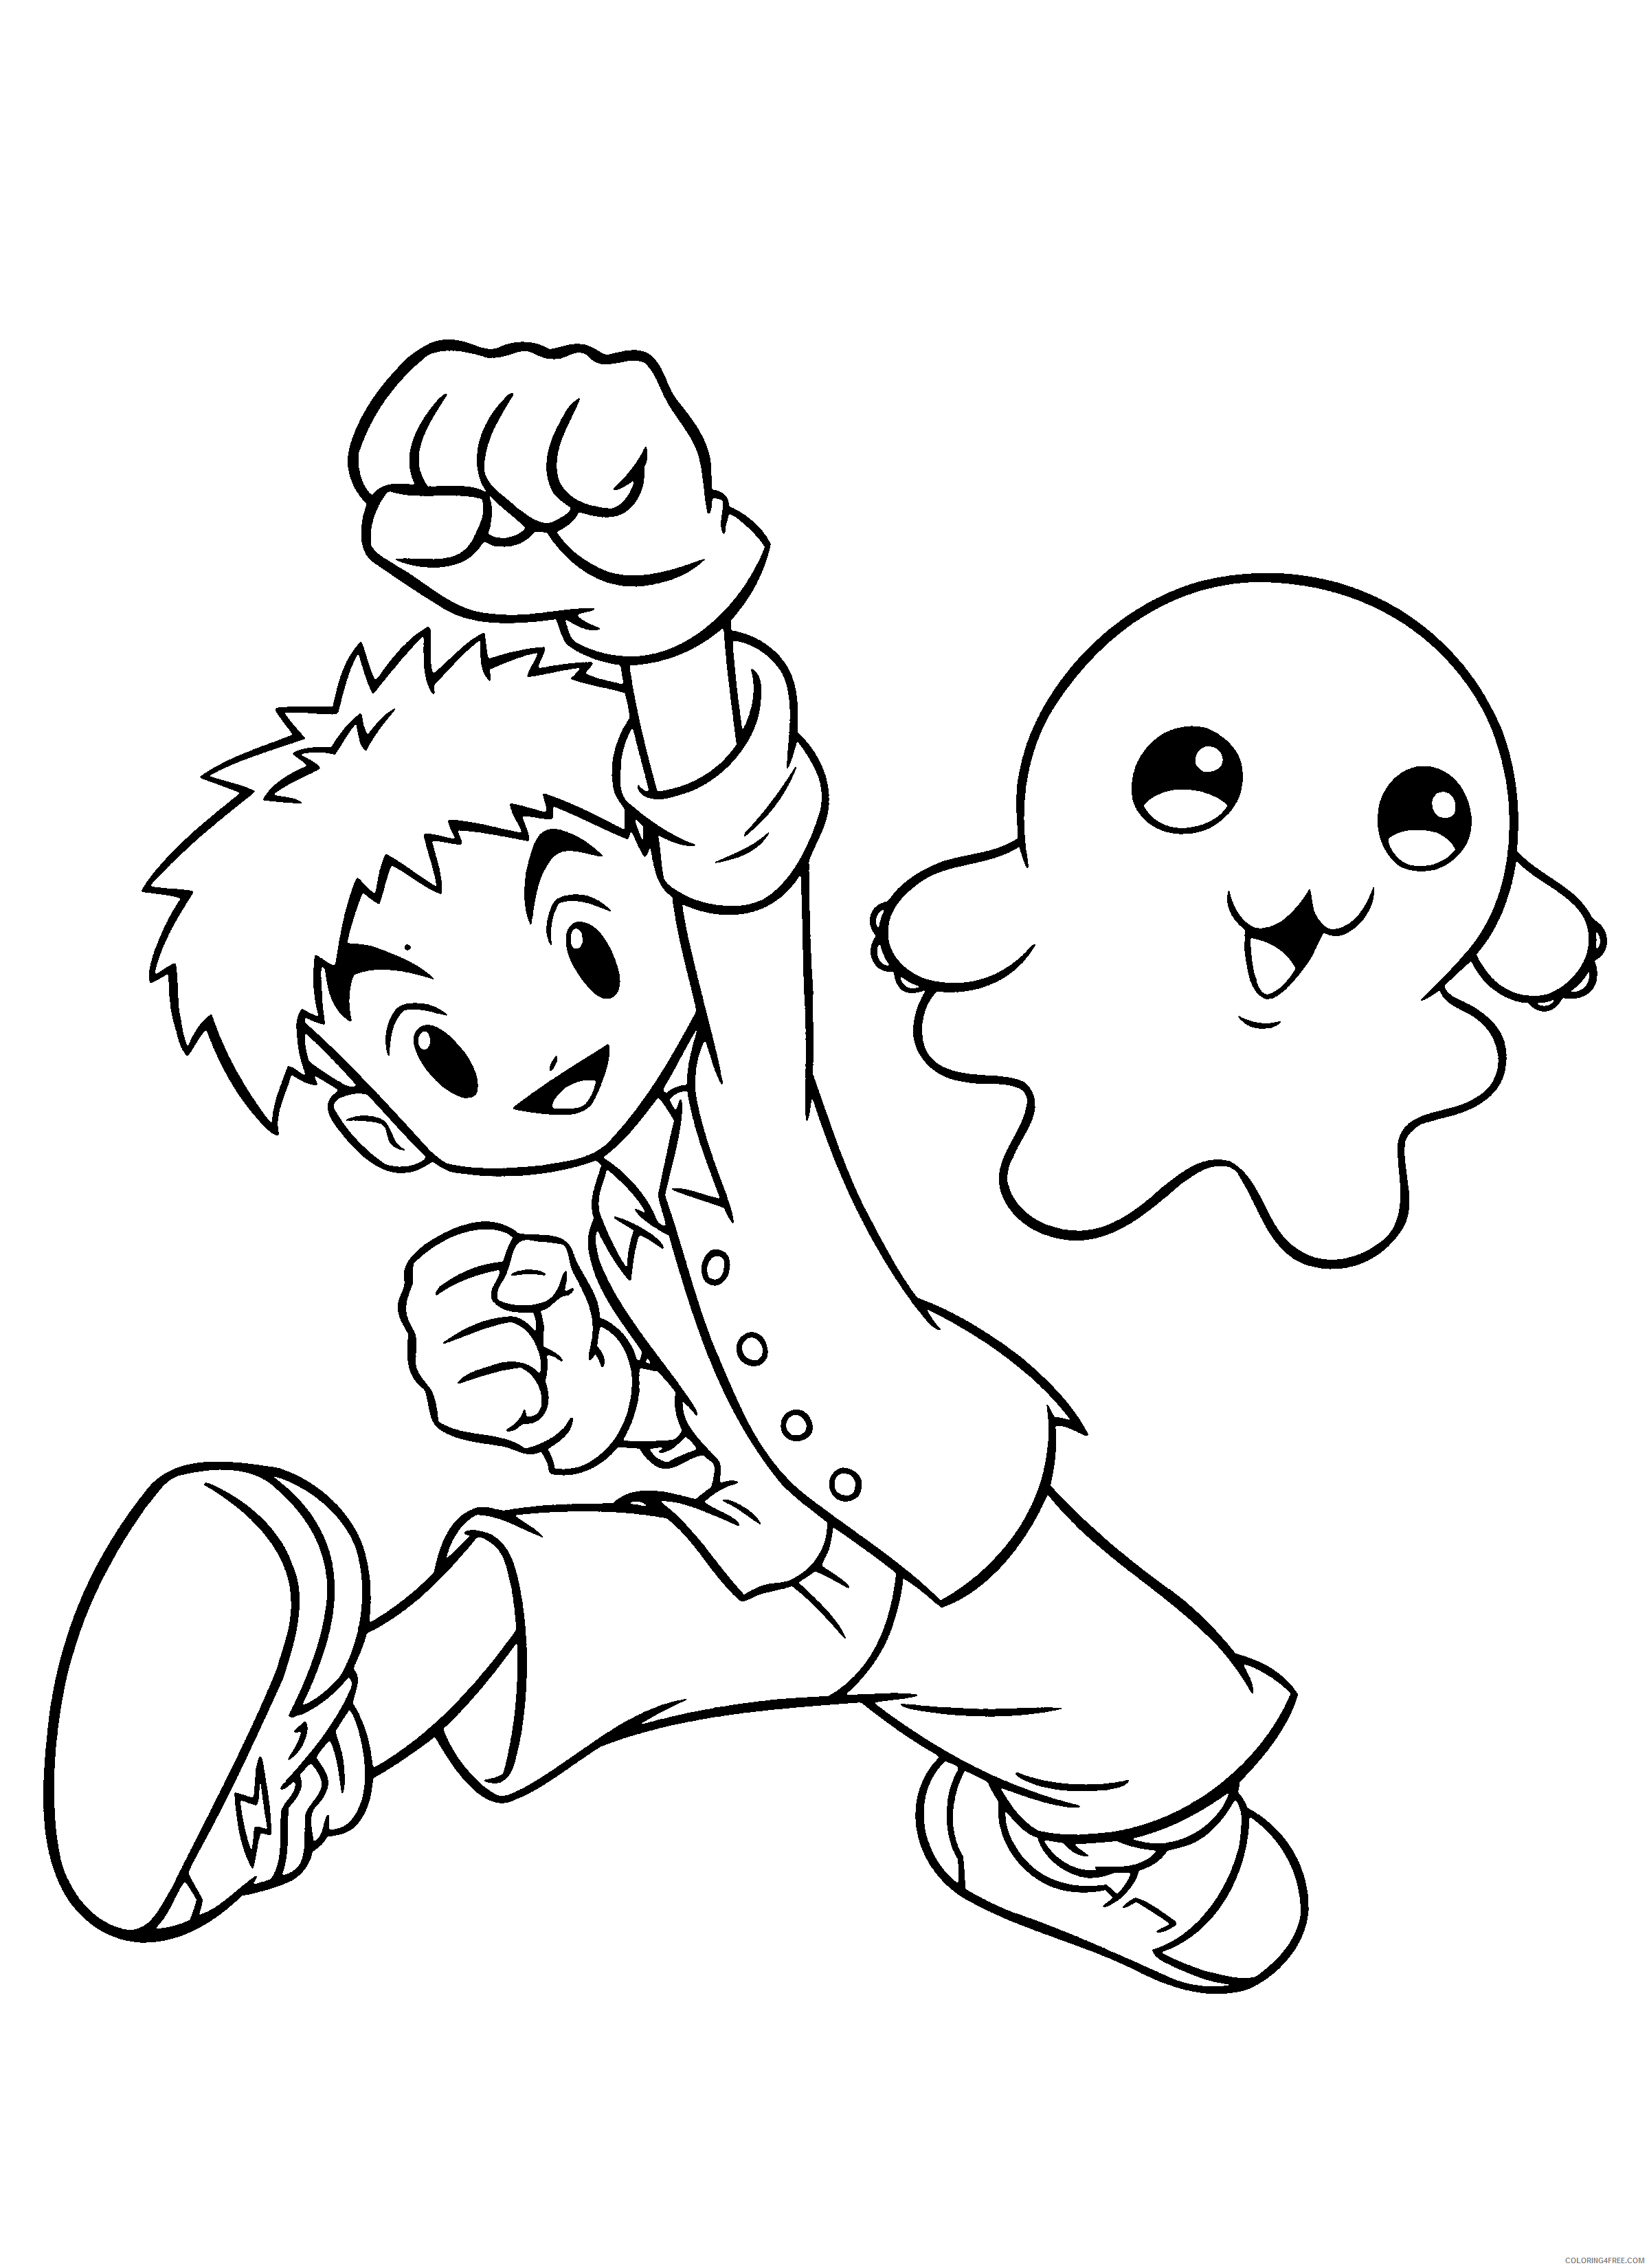 Digimon Printable Coloring Pages Anime digimon 221 2021 0304 Coloring4free